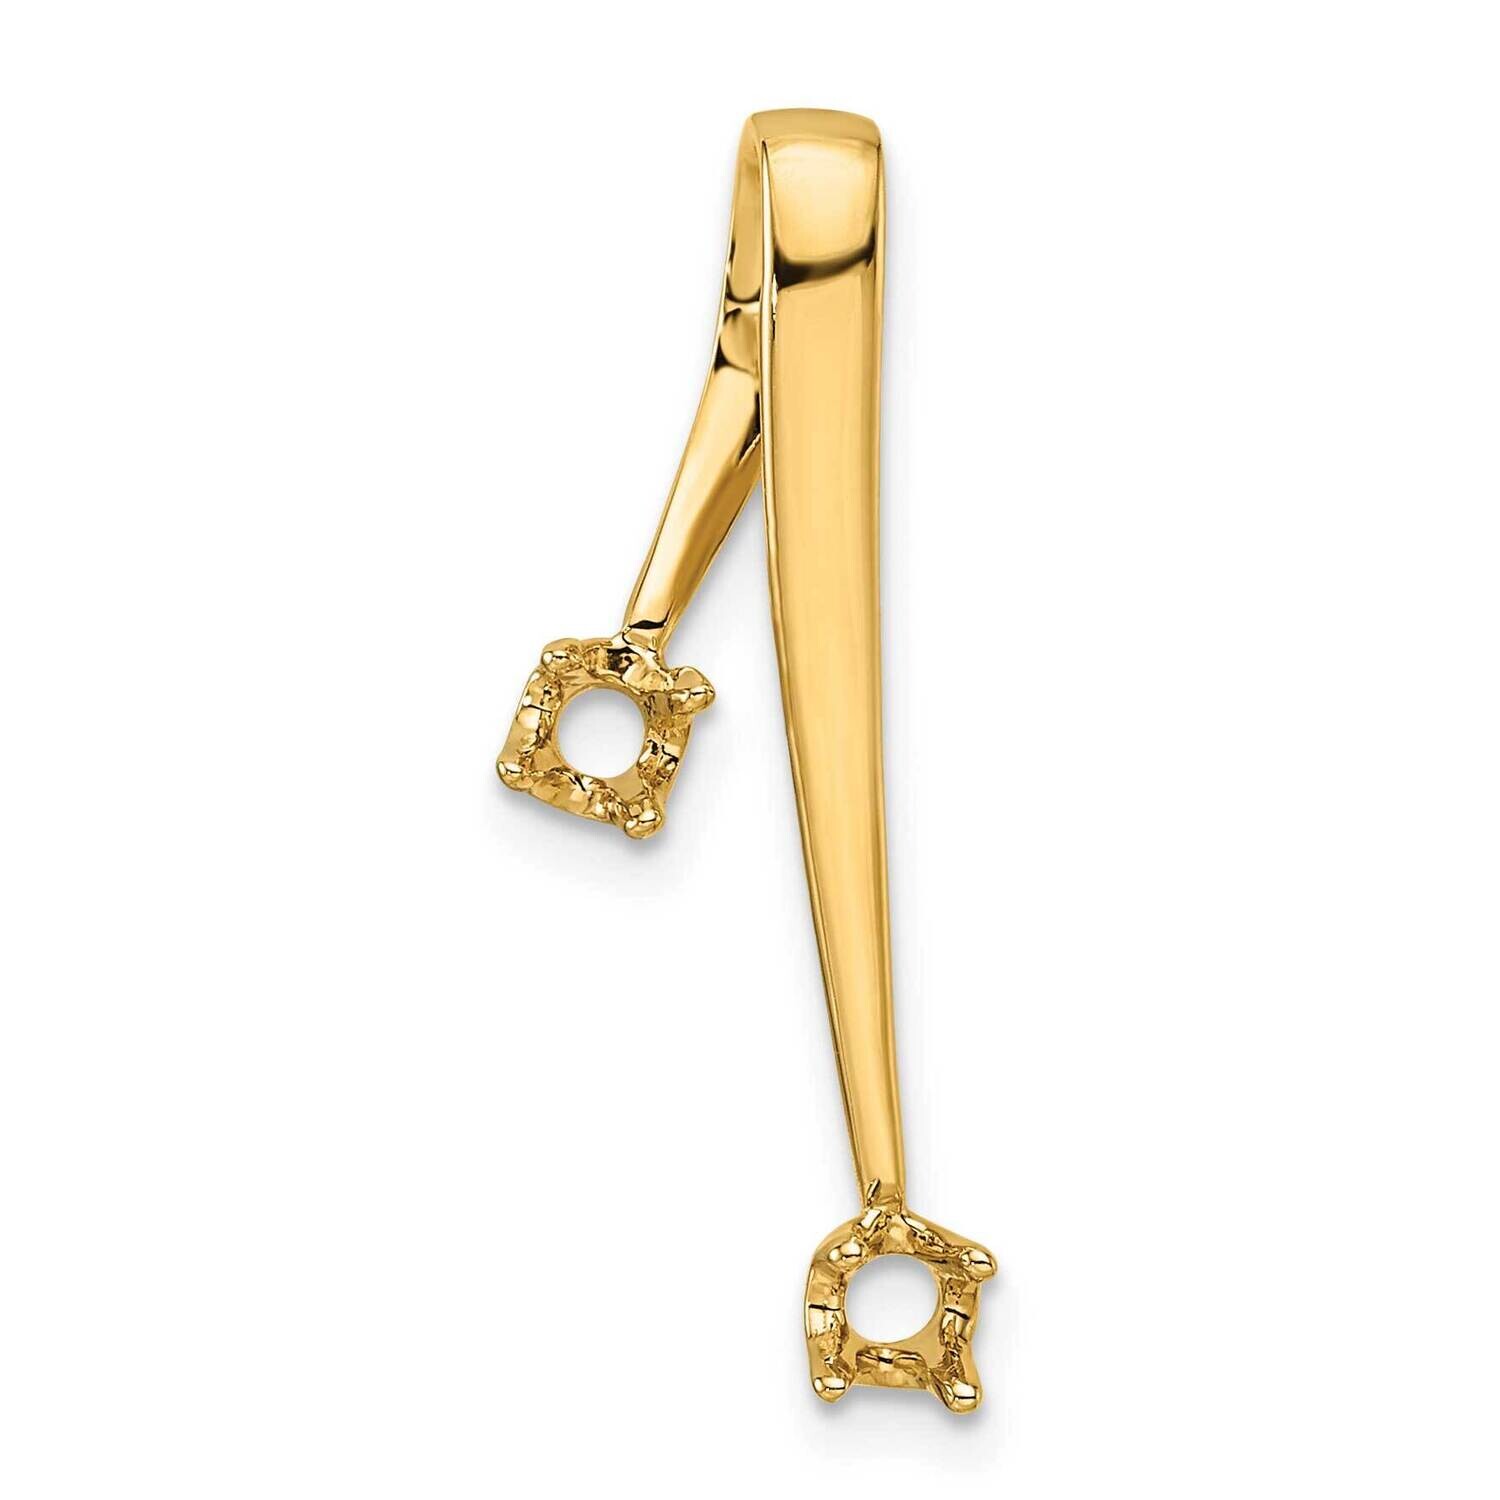 Holds 2-3mm Stone, Chain Slide Mounting 14k Gold XP34